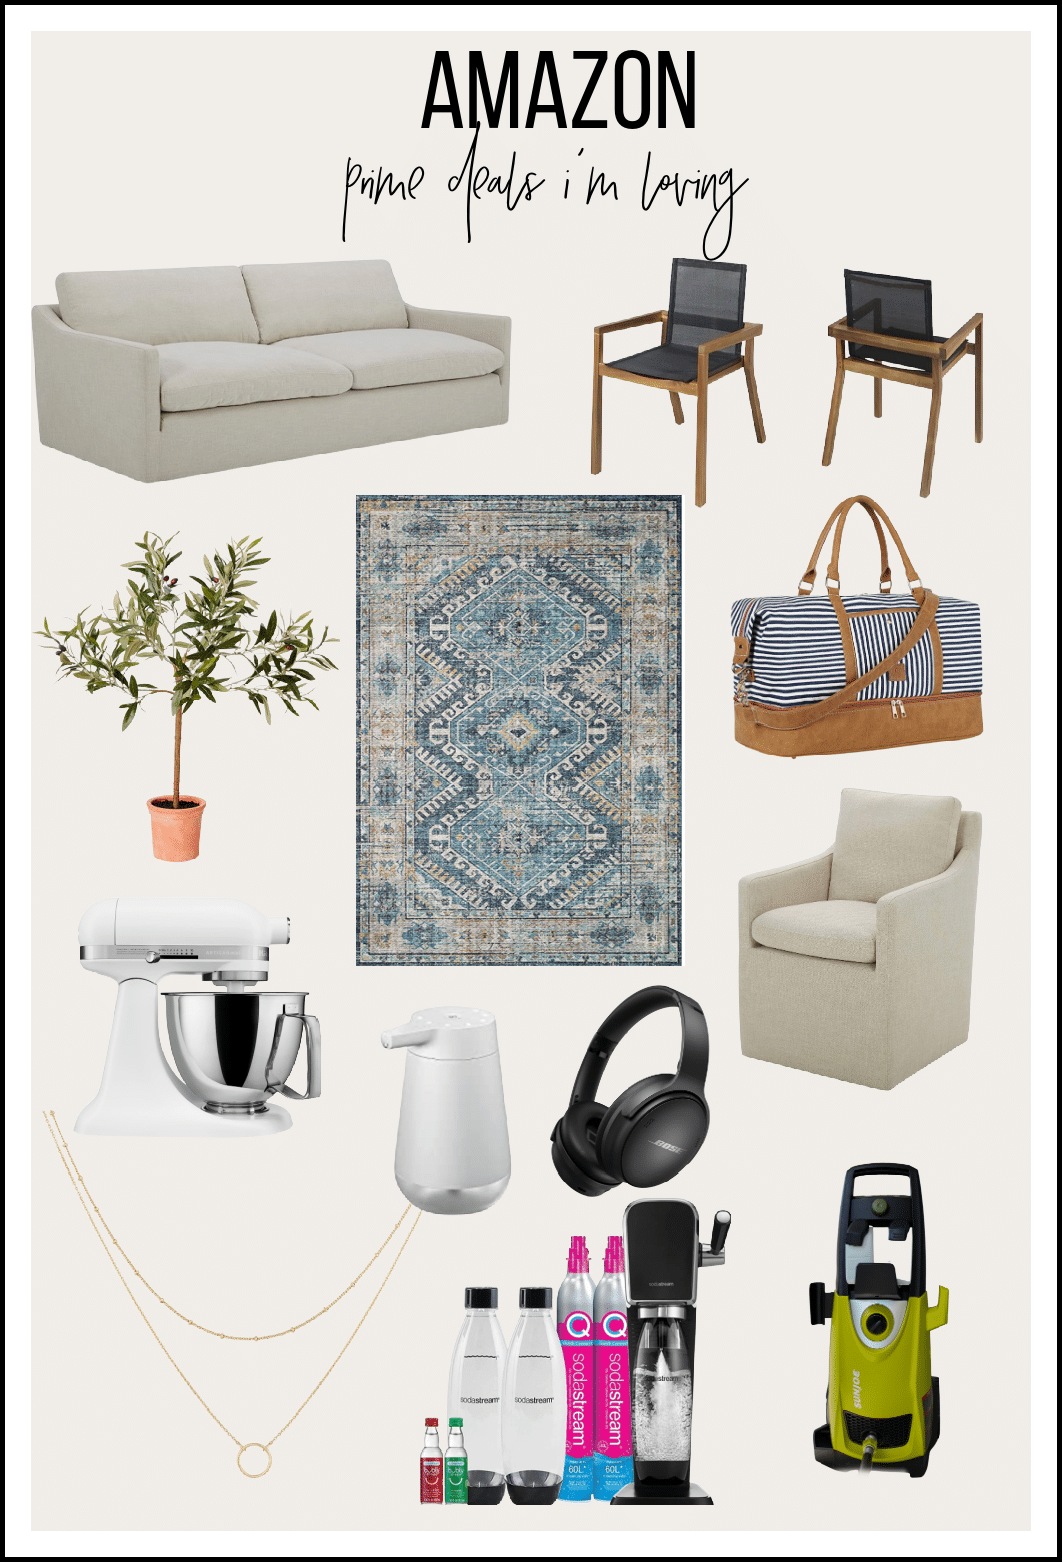 Amazon Prime Day Deals From Furnishings to Kitchen Essentials